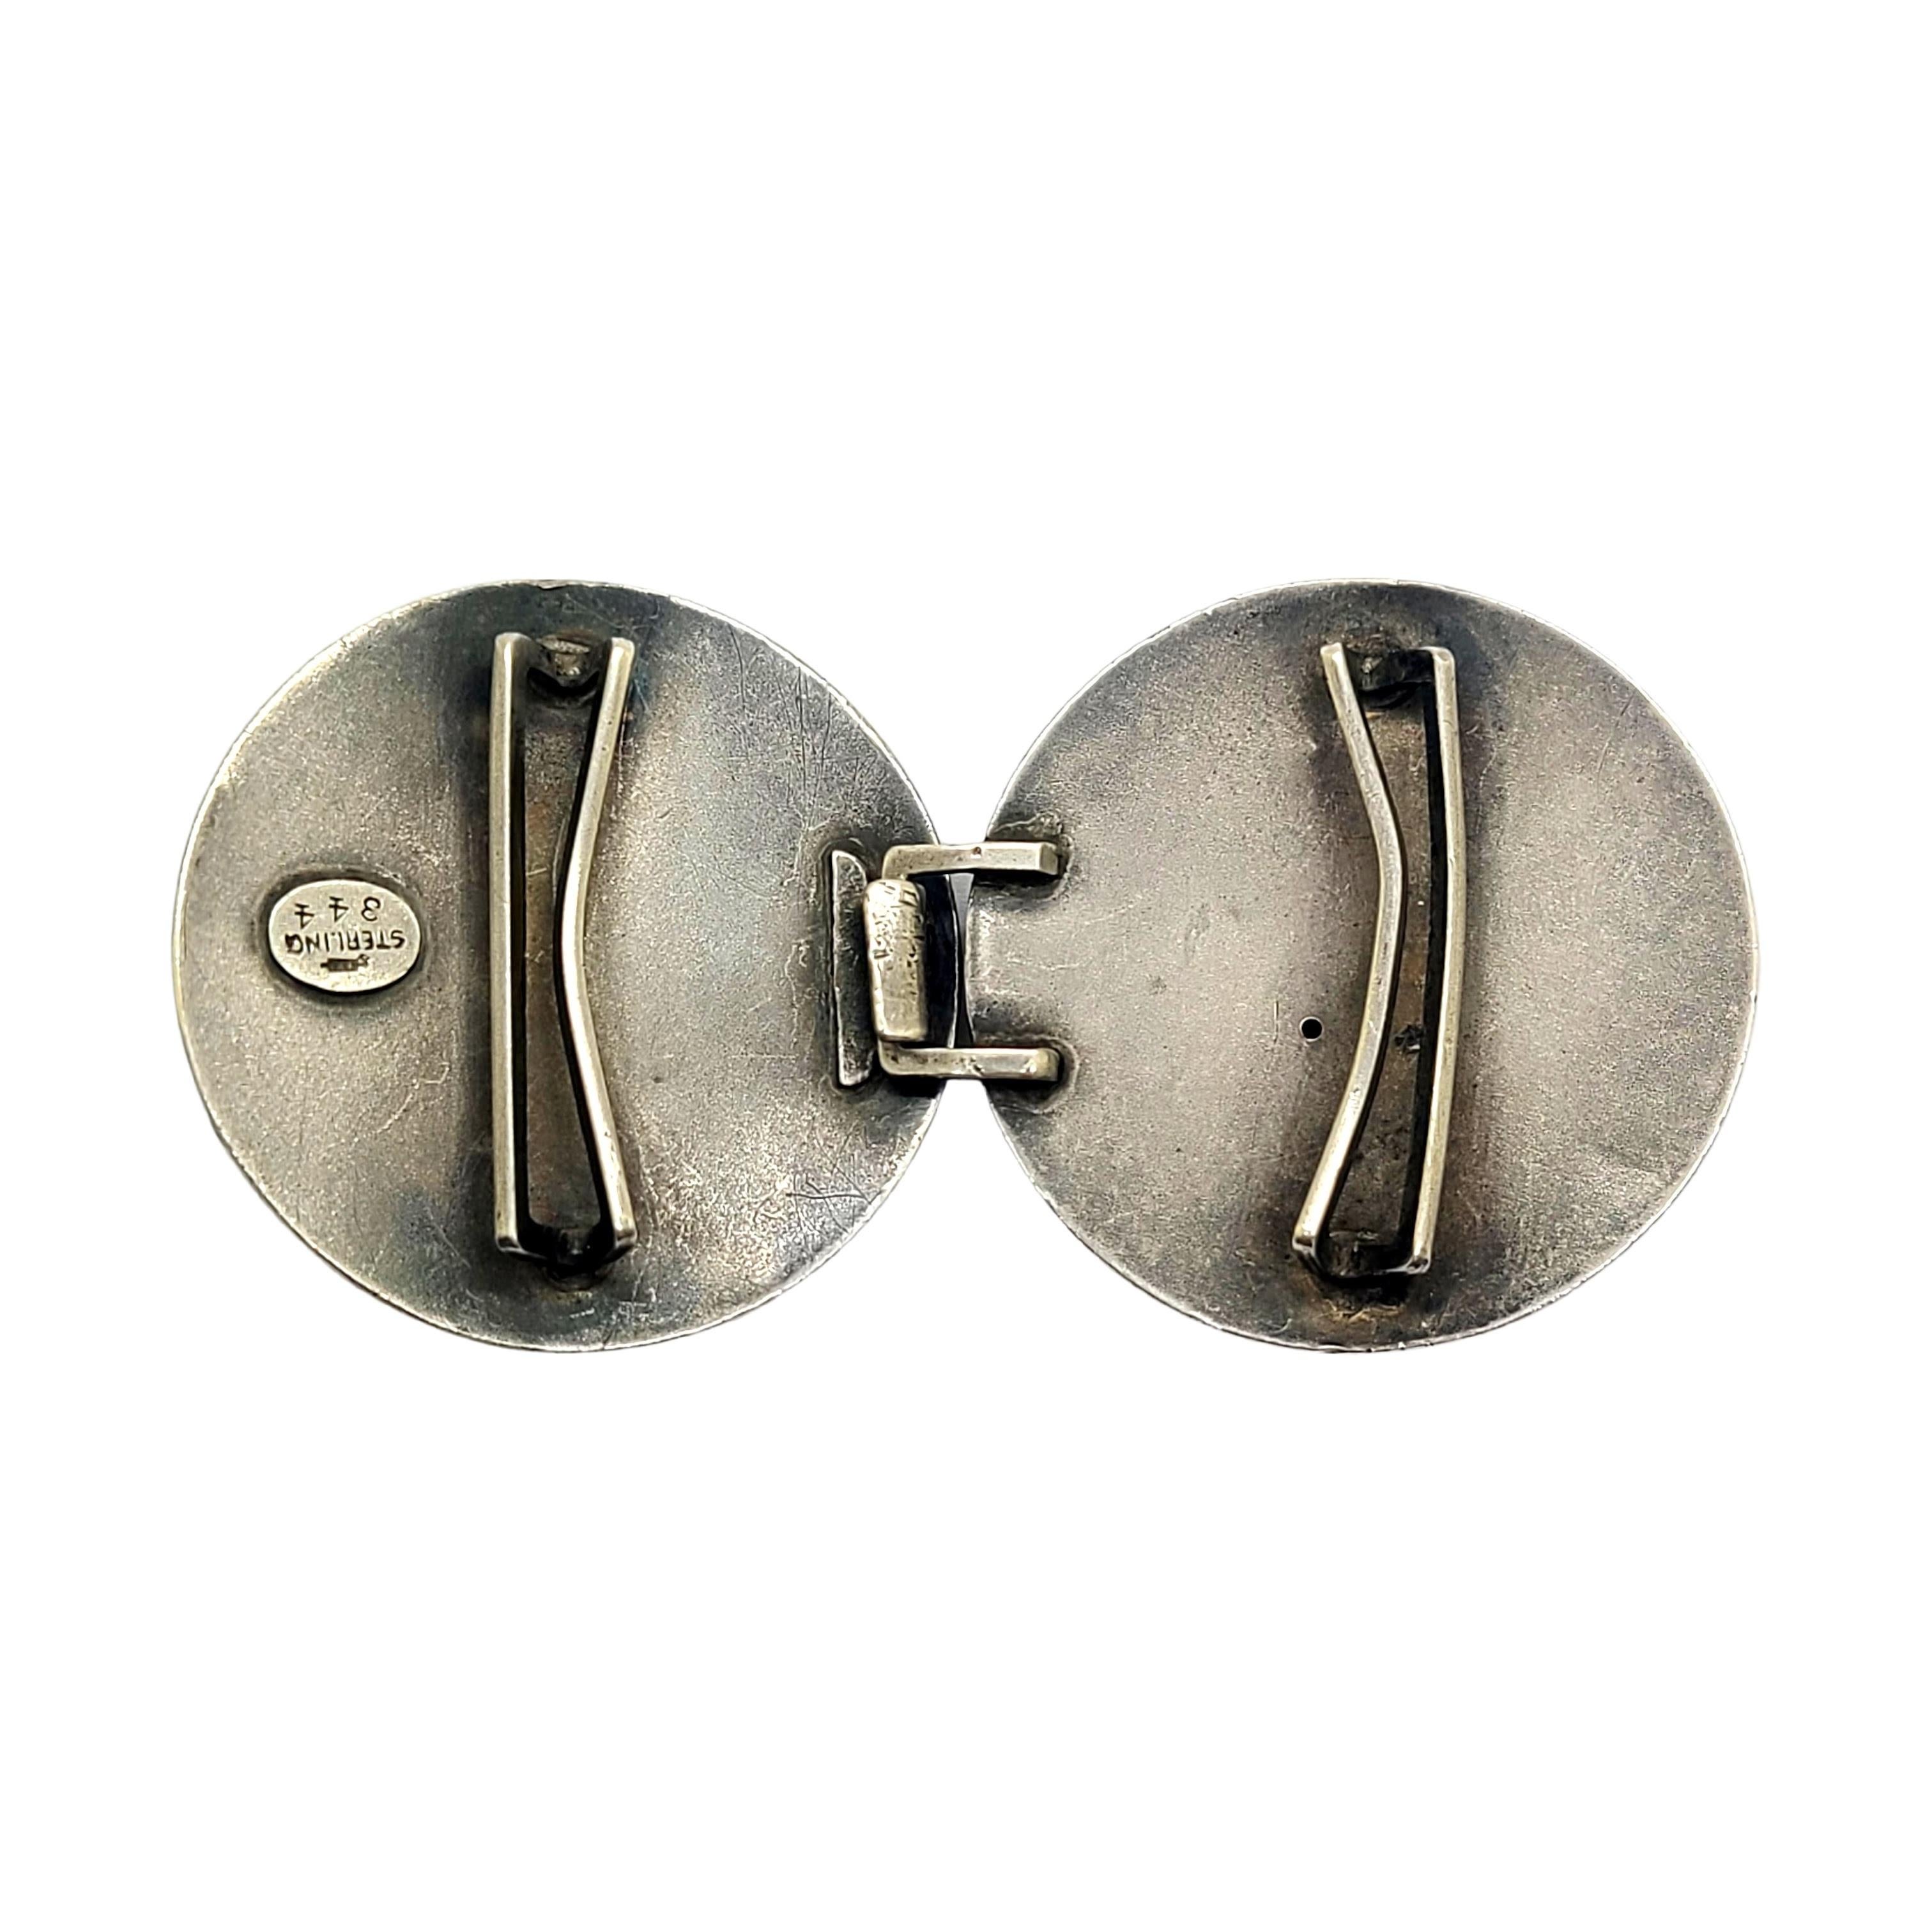 Sterling silver 2pc belt buckle by William B Kerr.

2pc round belt buckle featuring small round pink cabochons.

Measures approx 1 9/16